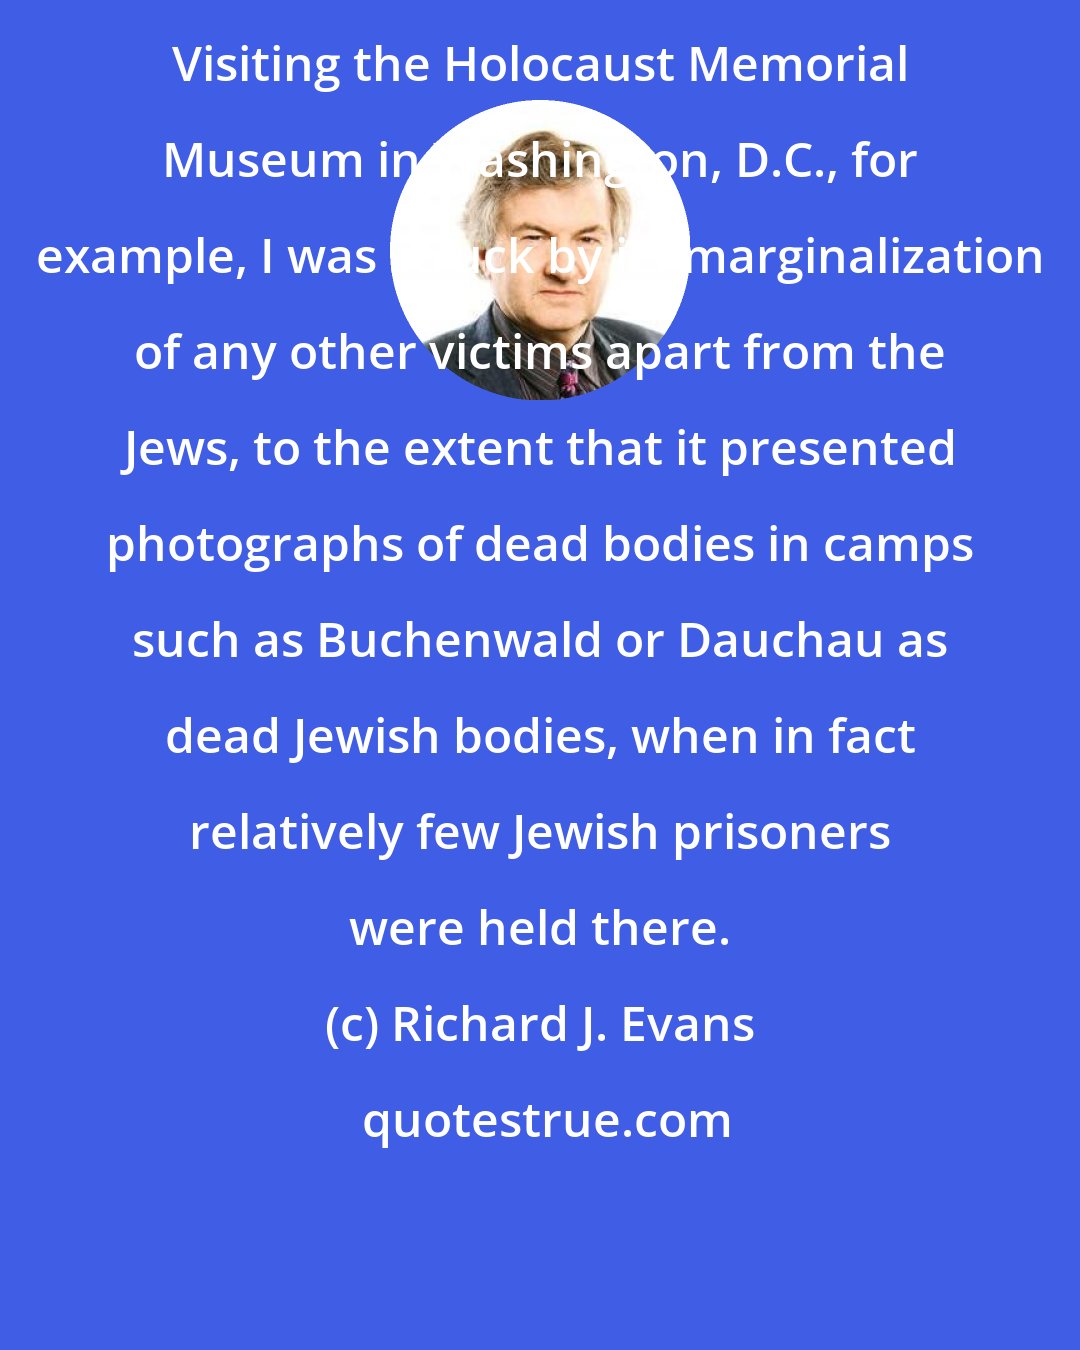 Richard J. Evans: Visiting the Holocaust Memorial Museum in Washington, D.C., for example, I was struck by its marginalization of any other victims apart from the Jews, to the extent that it presented photographs of dead bodies in camps such as Buchenwald or Dauchau as dead Jewish bodies, when in fact relatively few Jewish prisoners were held there.